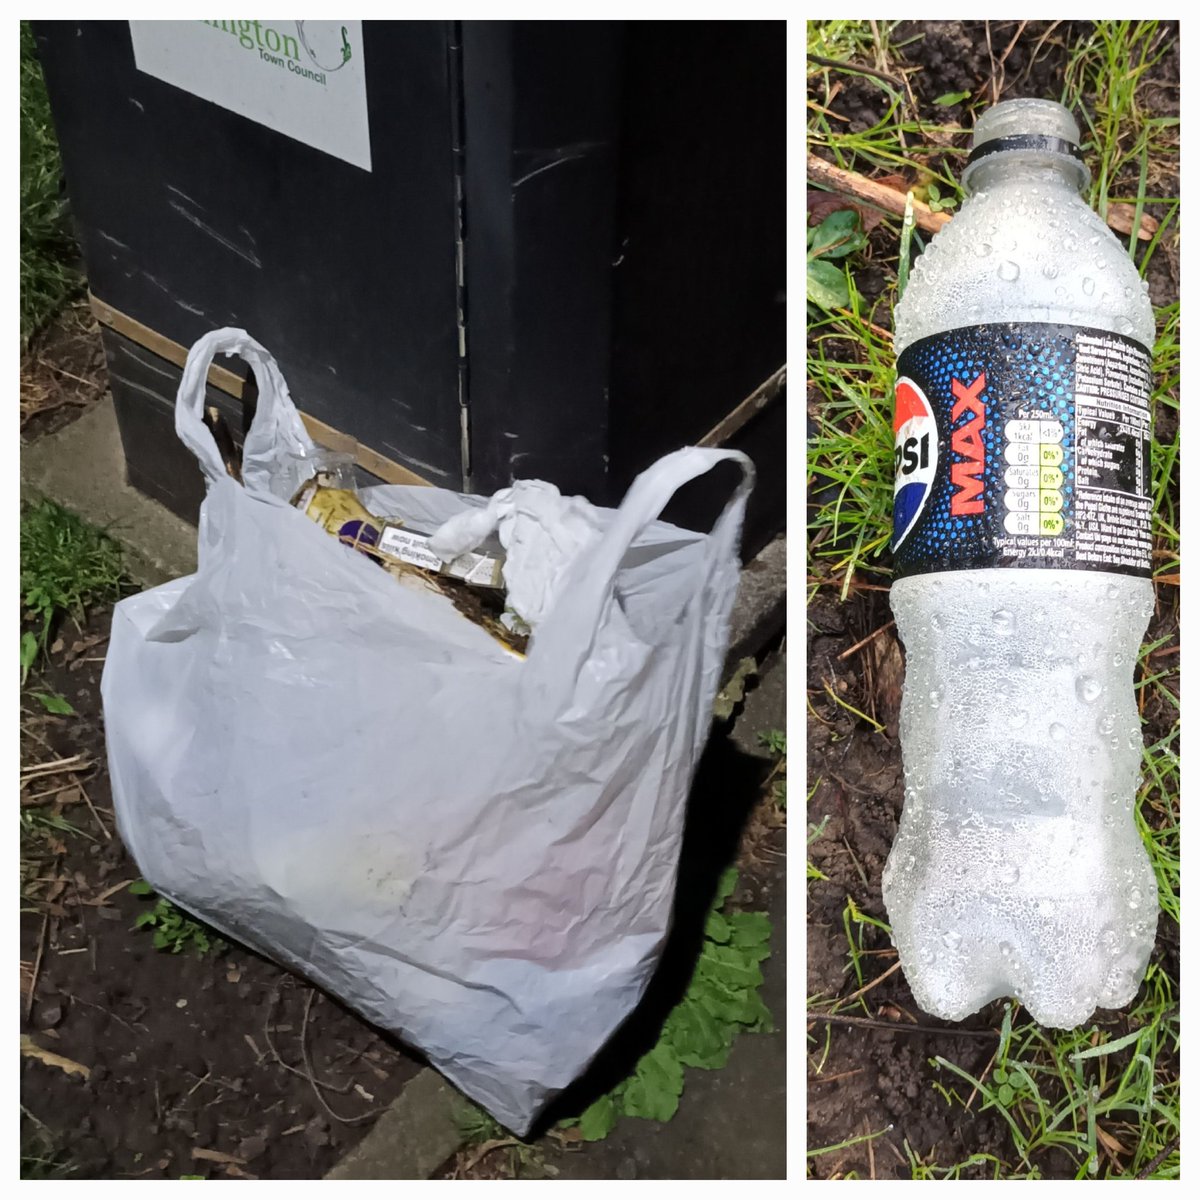 A busy week, but still fitted in a few hours of #litterpicking. #lovewhereyoulive #Northumberland @Cleanup_UK @cleanupbritain @KeepBritainTidy @N_landCouncil